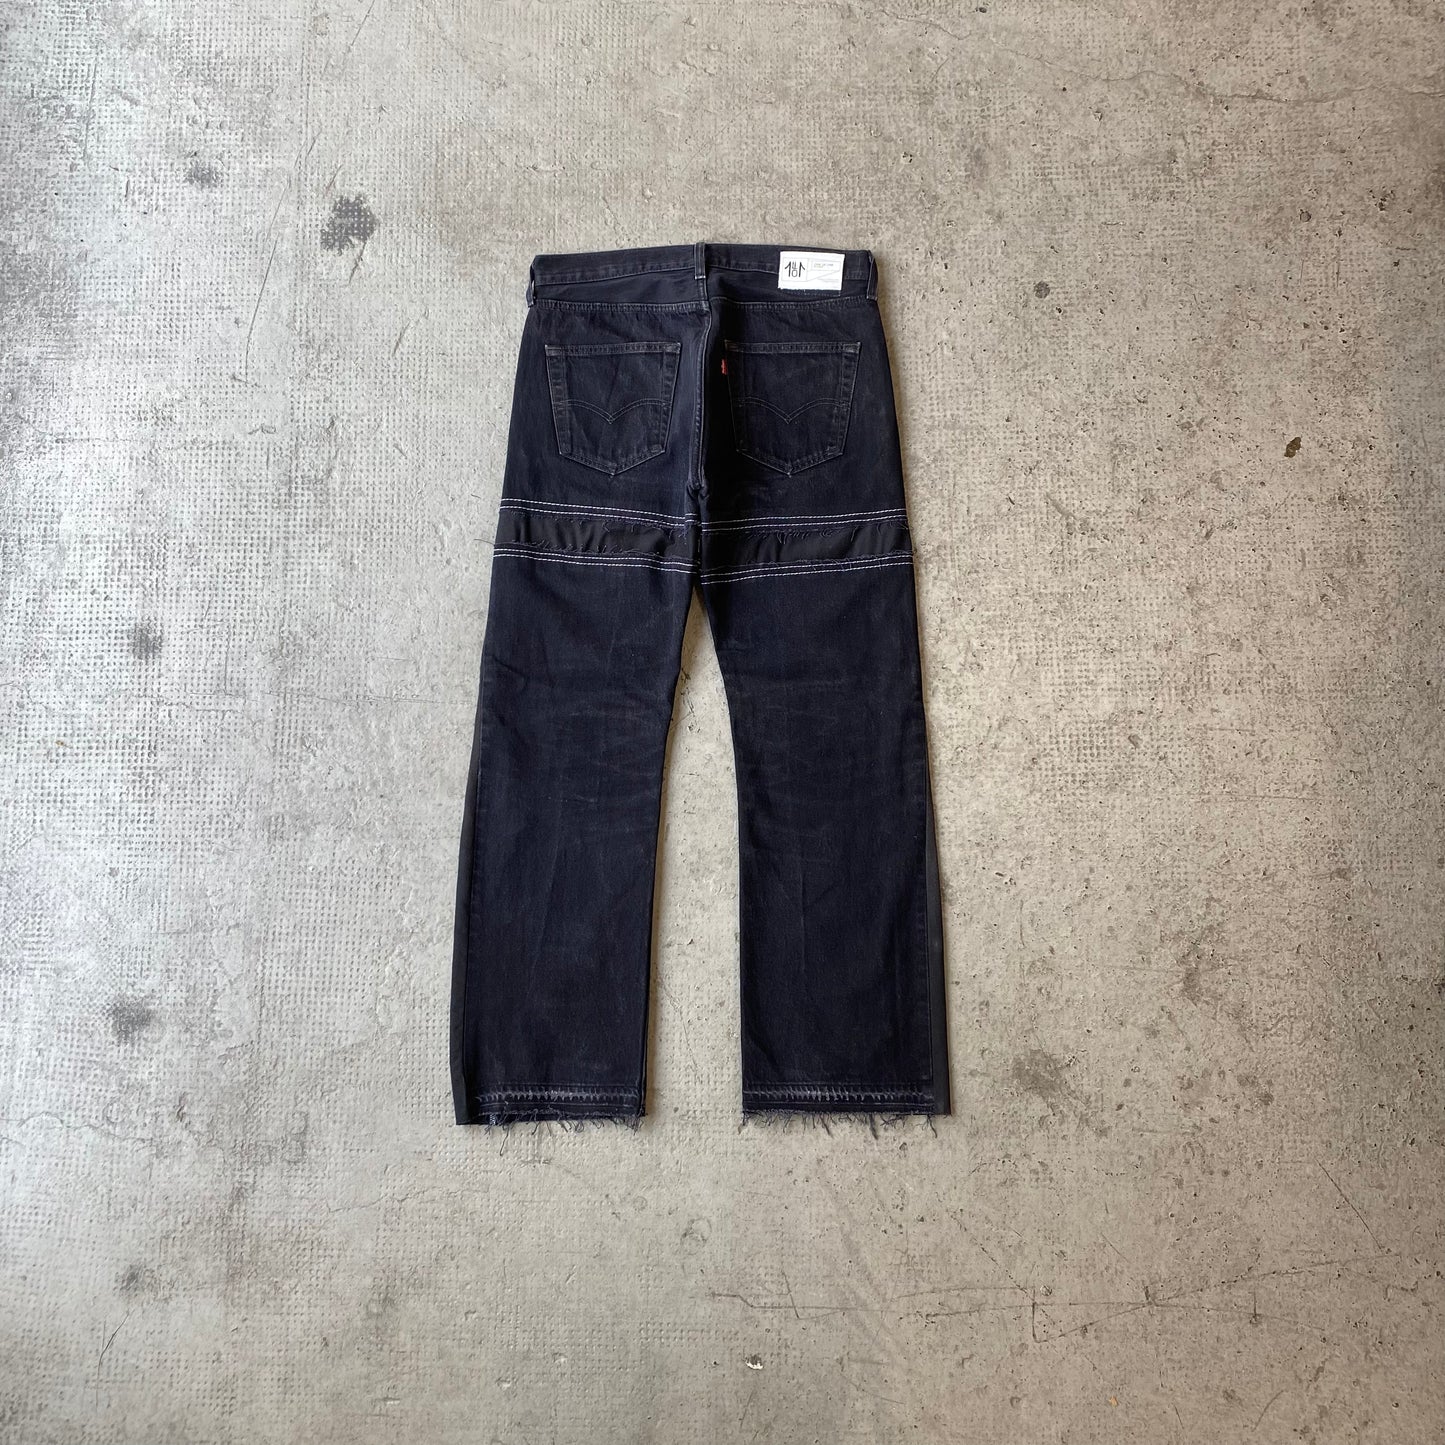 501 LEVI'S EXAGGERATED FADED BLACK